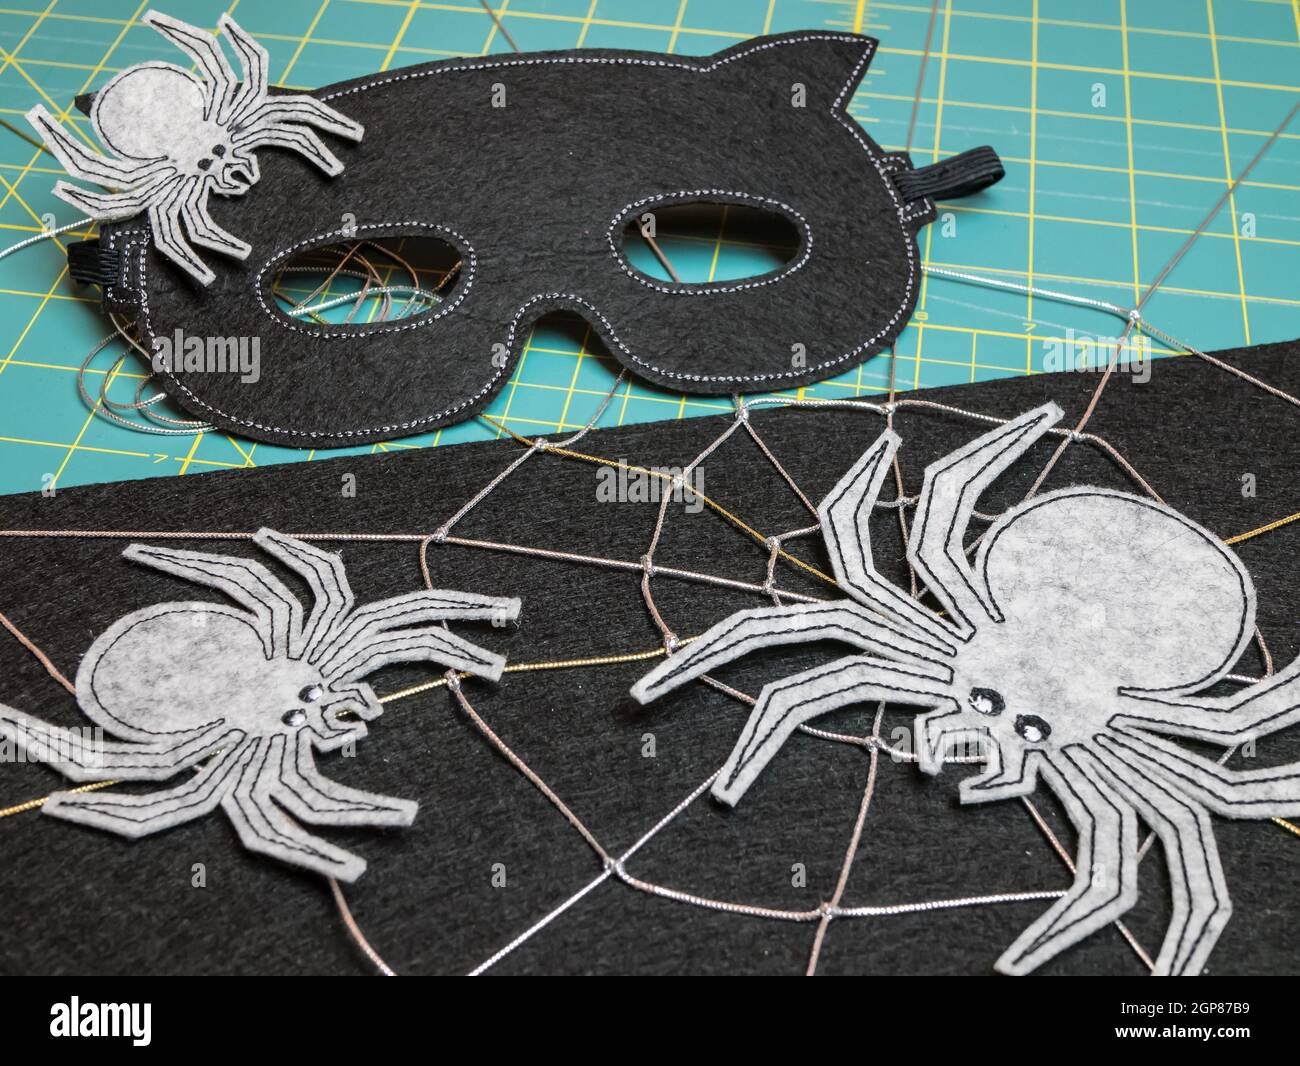 Mask and spiders from felt as the decoration for the Halloween Festival.  Black mask for masquerade DIY Stock Photo - Alamy